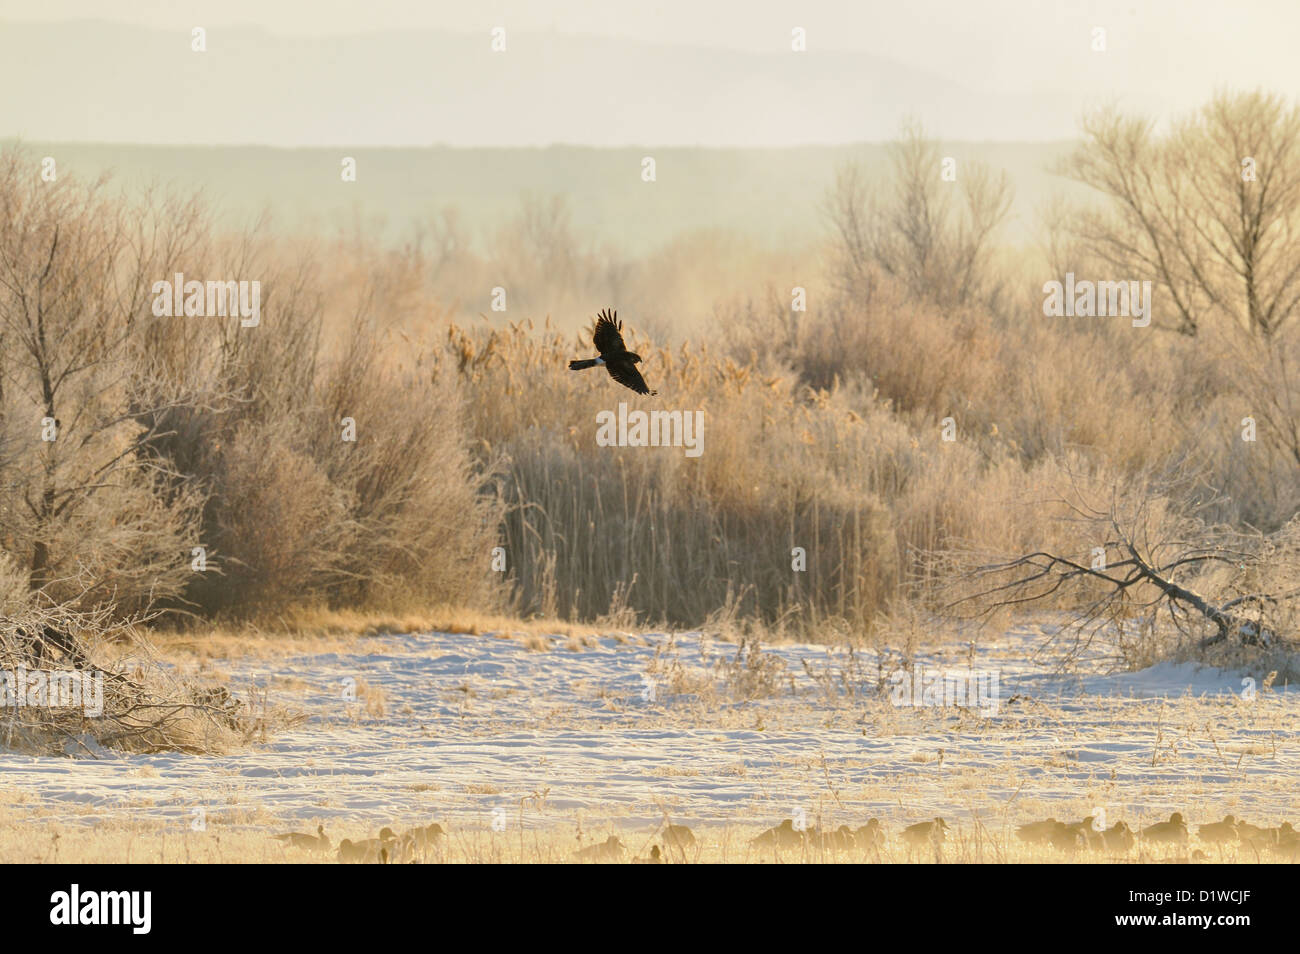 Northern harrier (Circus cyaneus) Hunting, Bosque del Apache National Wildlife Refuge, New Mexico, USA Stock Photo